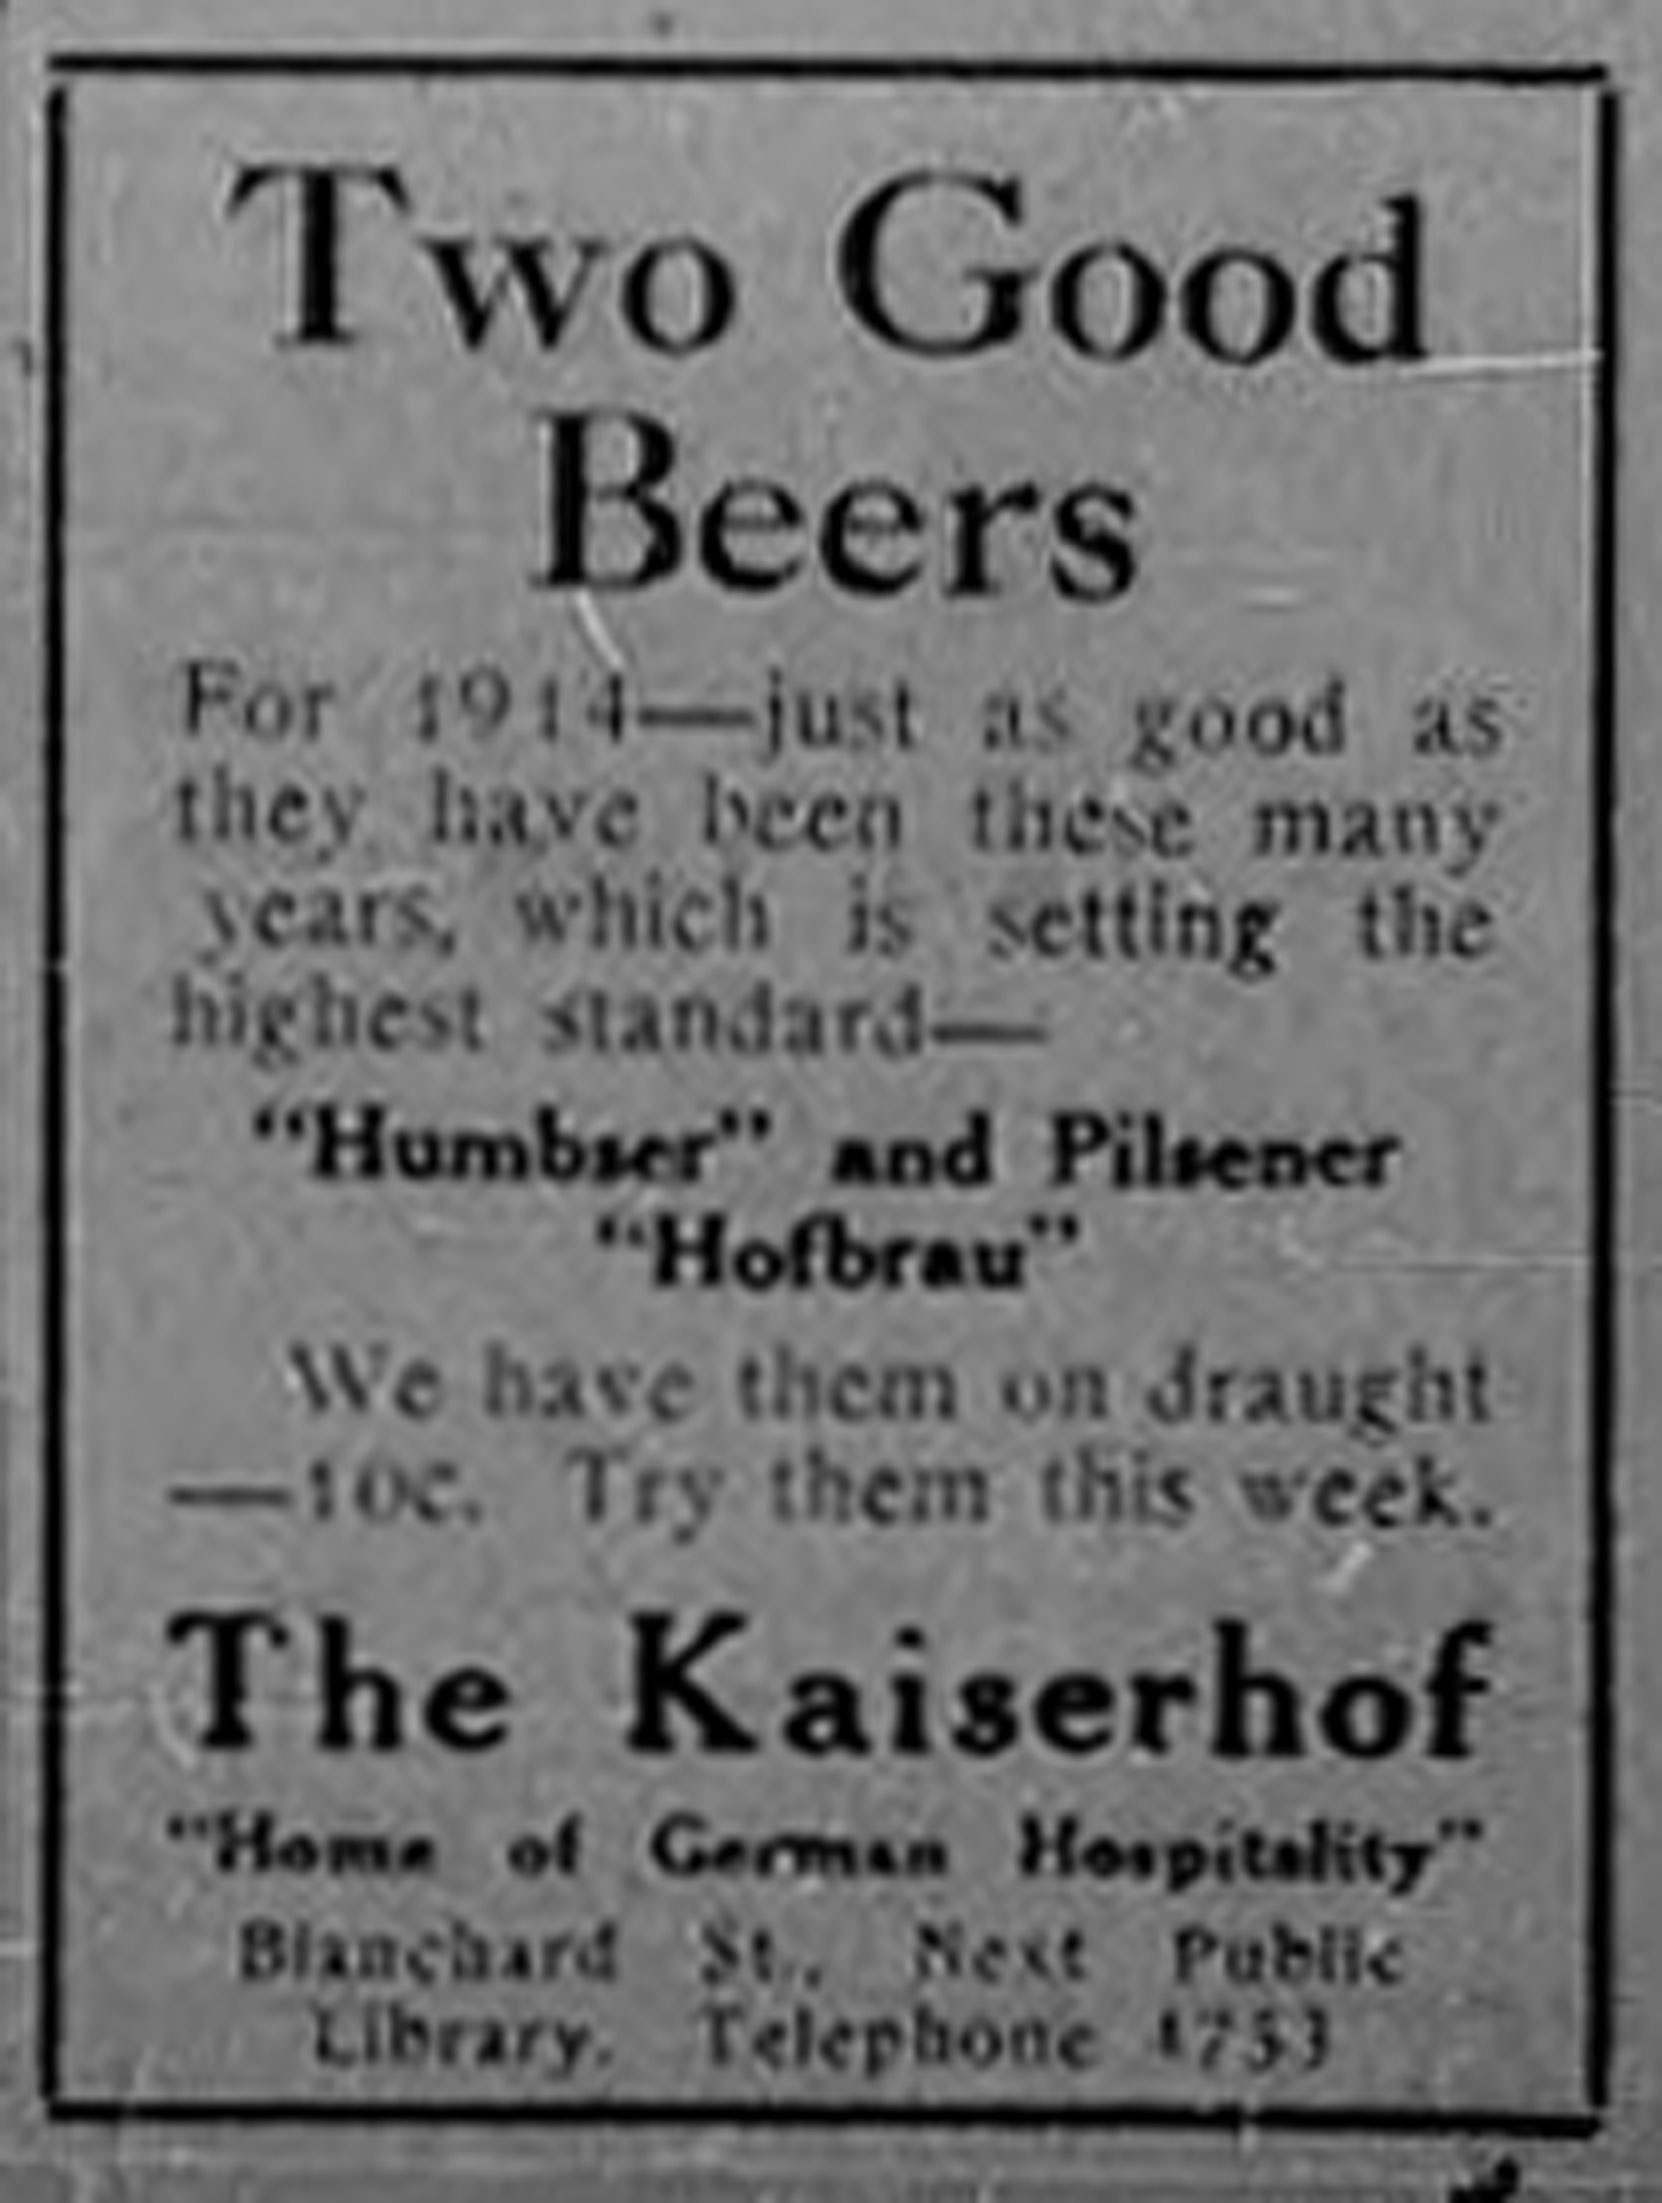 1913 advertisement for The Kaiserhof "Home of German Hospitality", 1320-1322 Blanshard Street. (Victoria Online Sightseeing Tours collection)